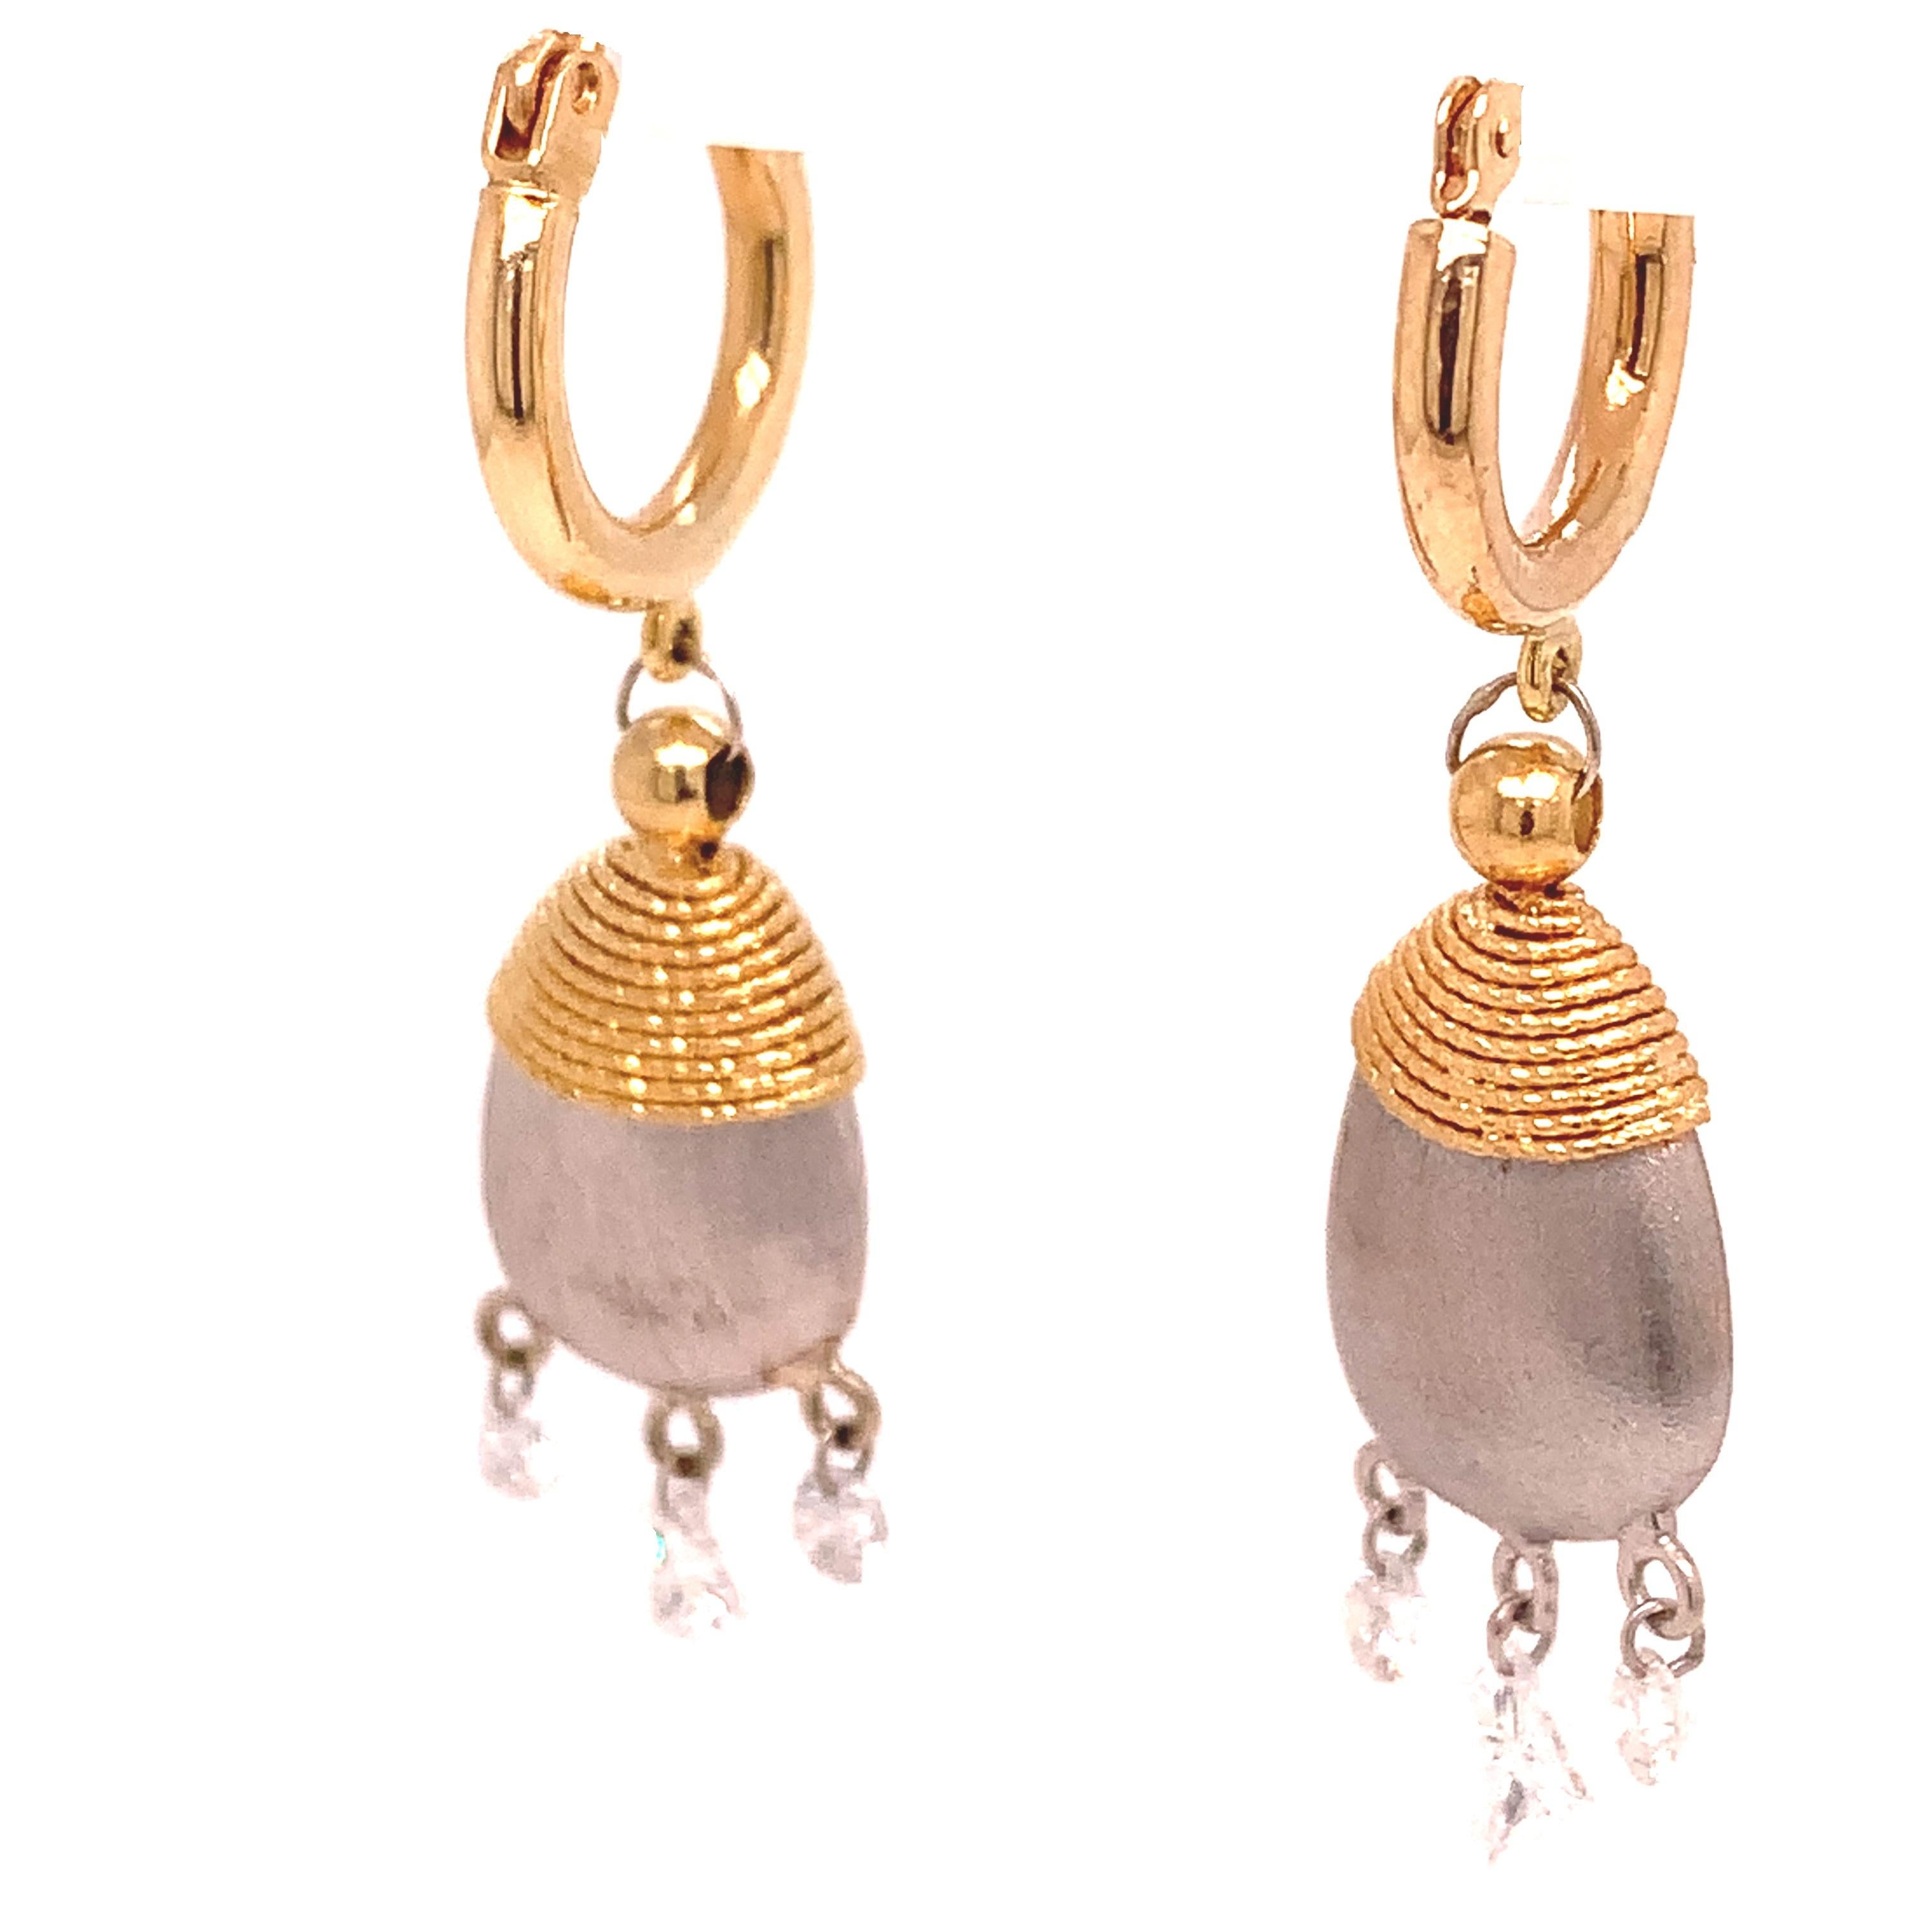 Dainty Collection

Yellow Gold drop earrings, each set with 3 elegantly sparkling diamonds totaling 0.76 carats